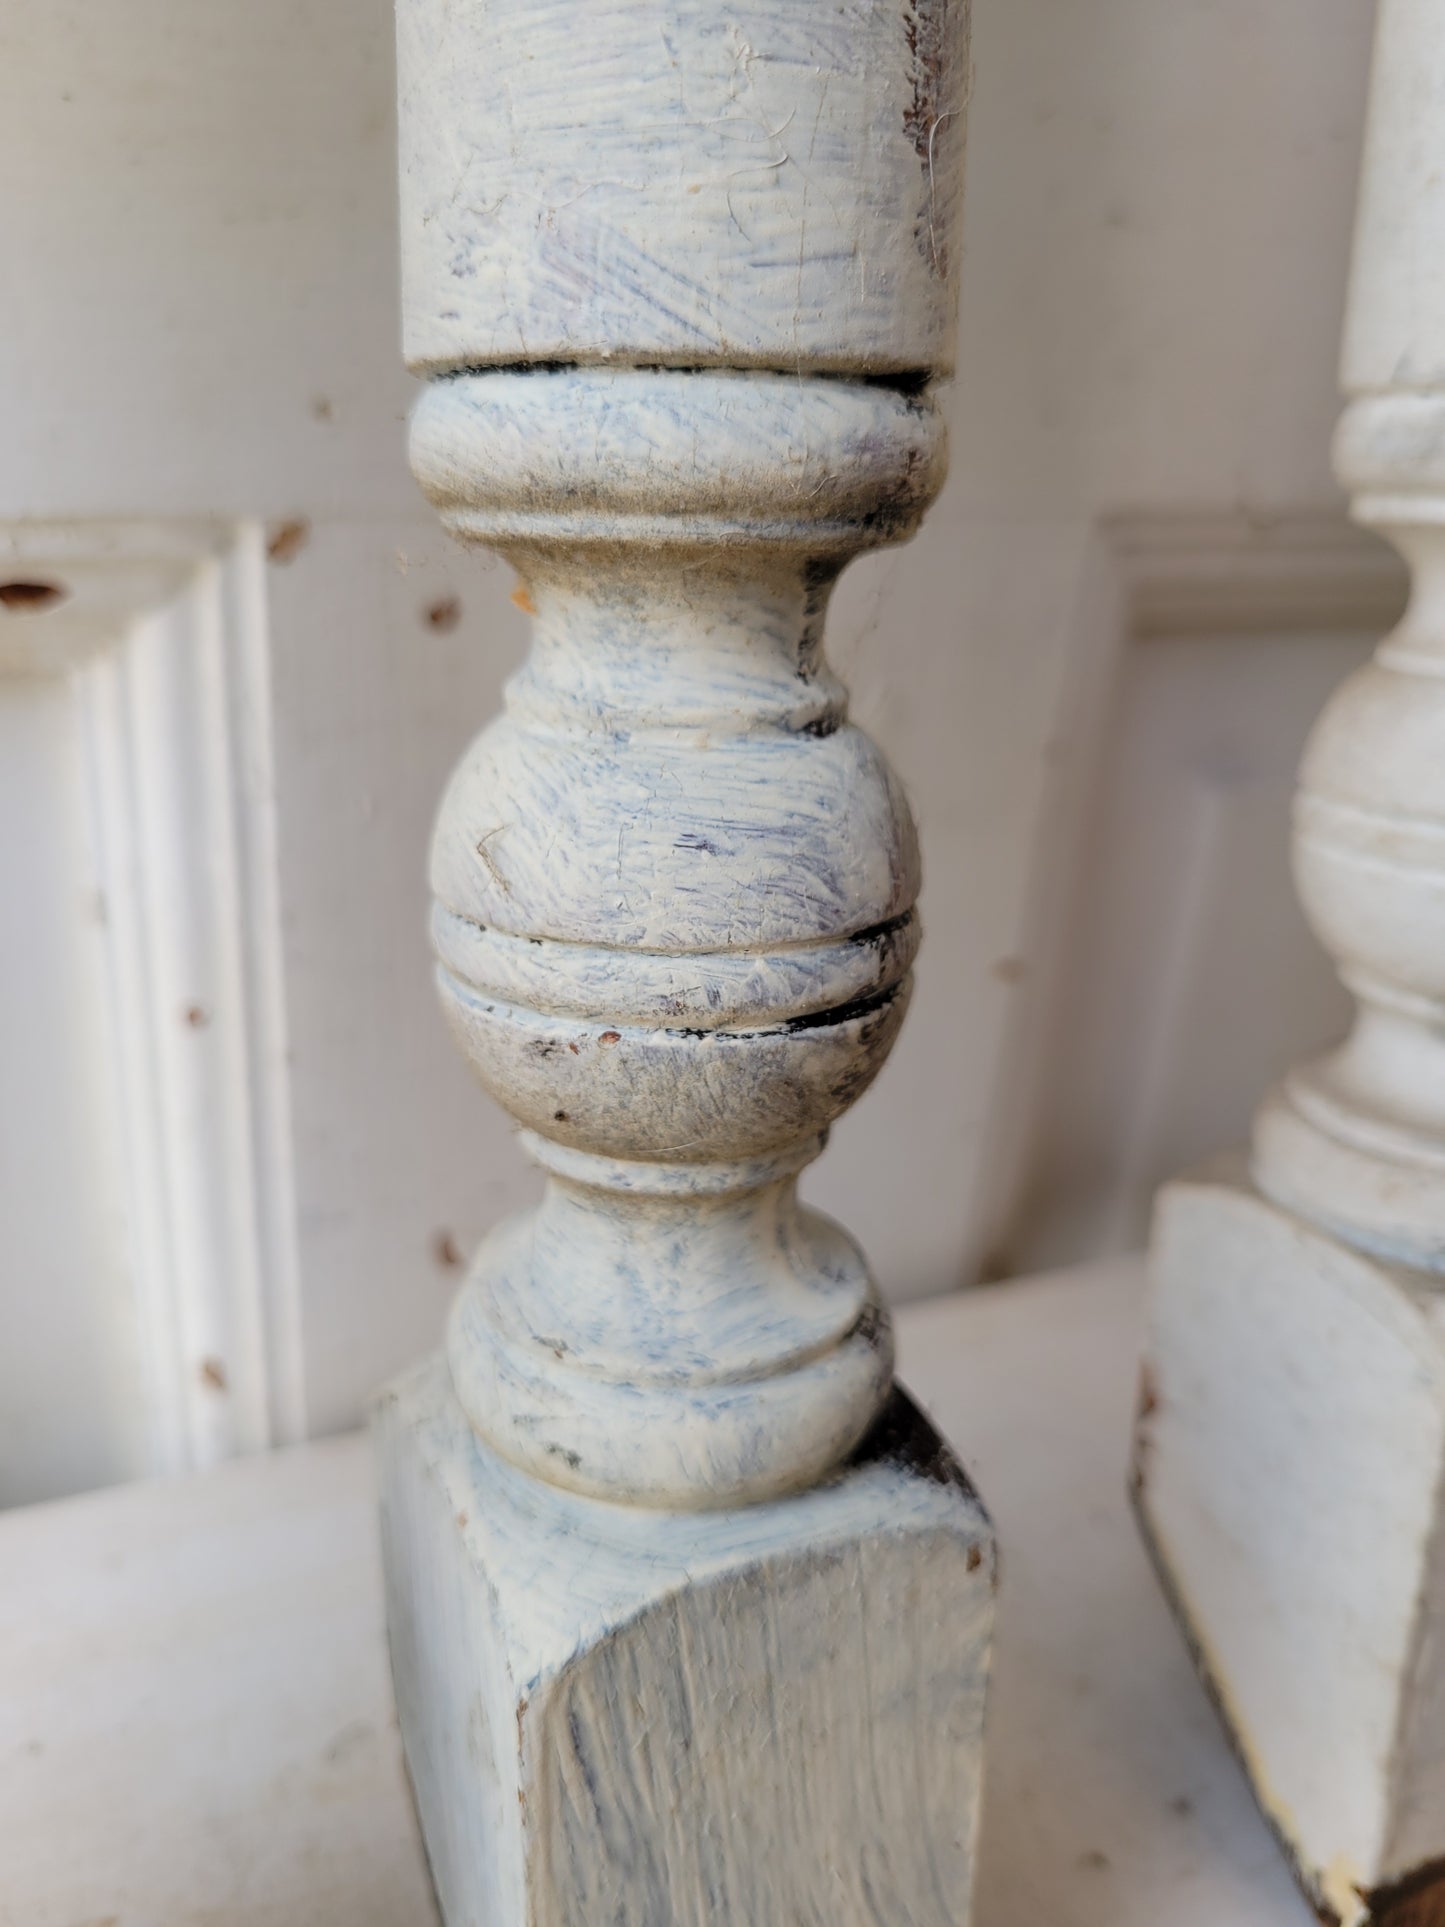 Set of Four Antique Staircase Spindles or Balusters, Staircase Railing Spindles